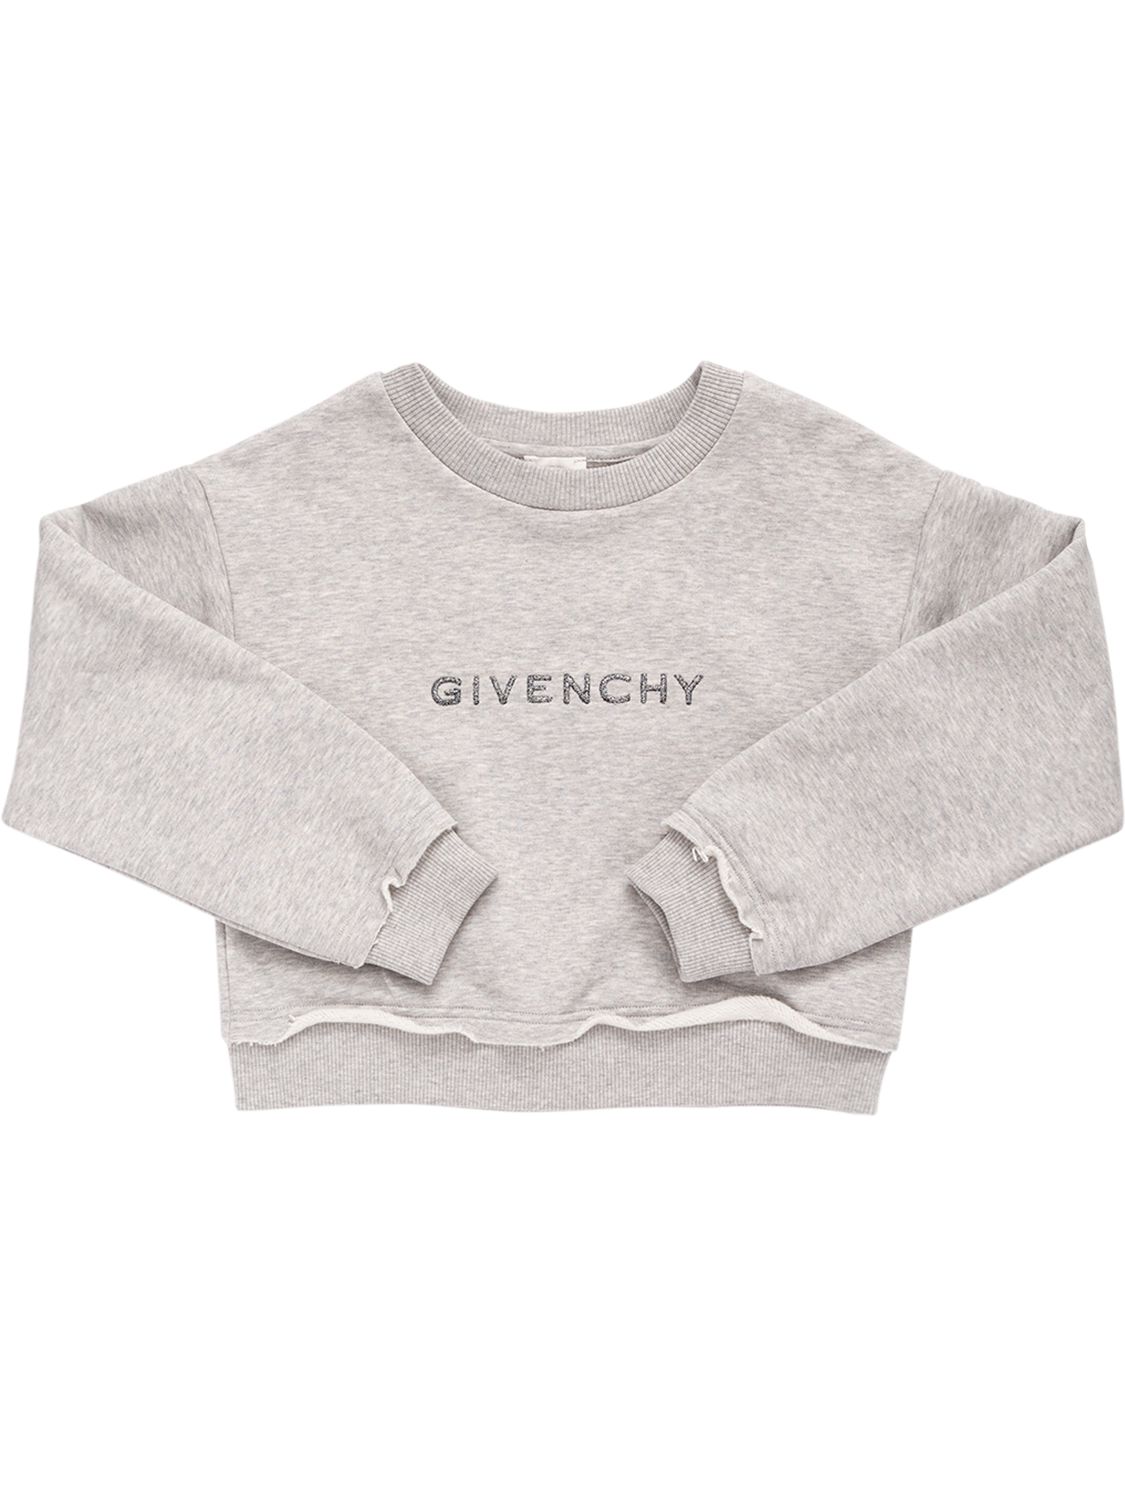 Givenchy Kids' Cotton Sweatshirt W/ Embellished Logo In Gray